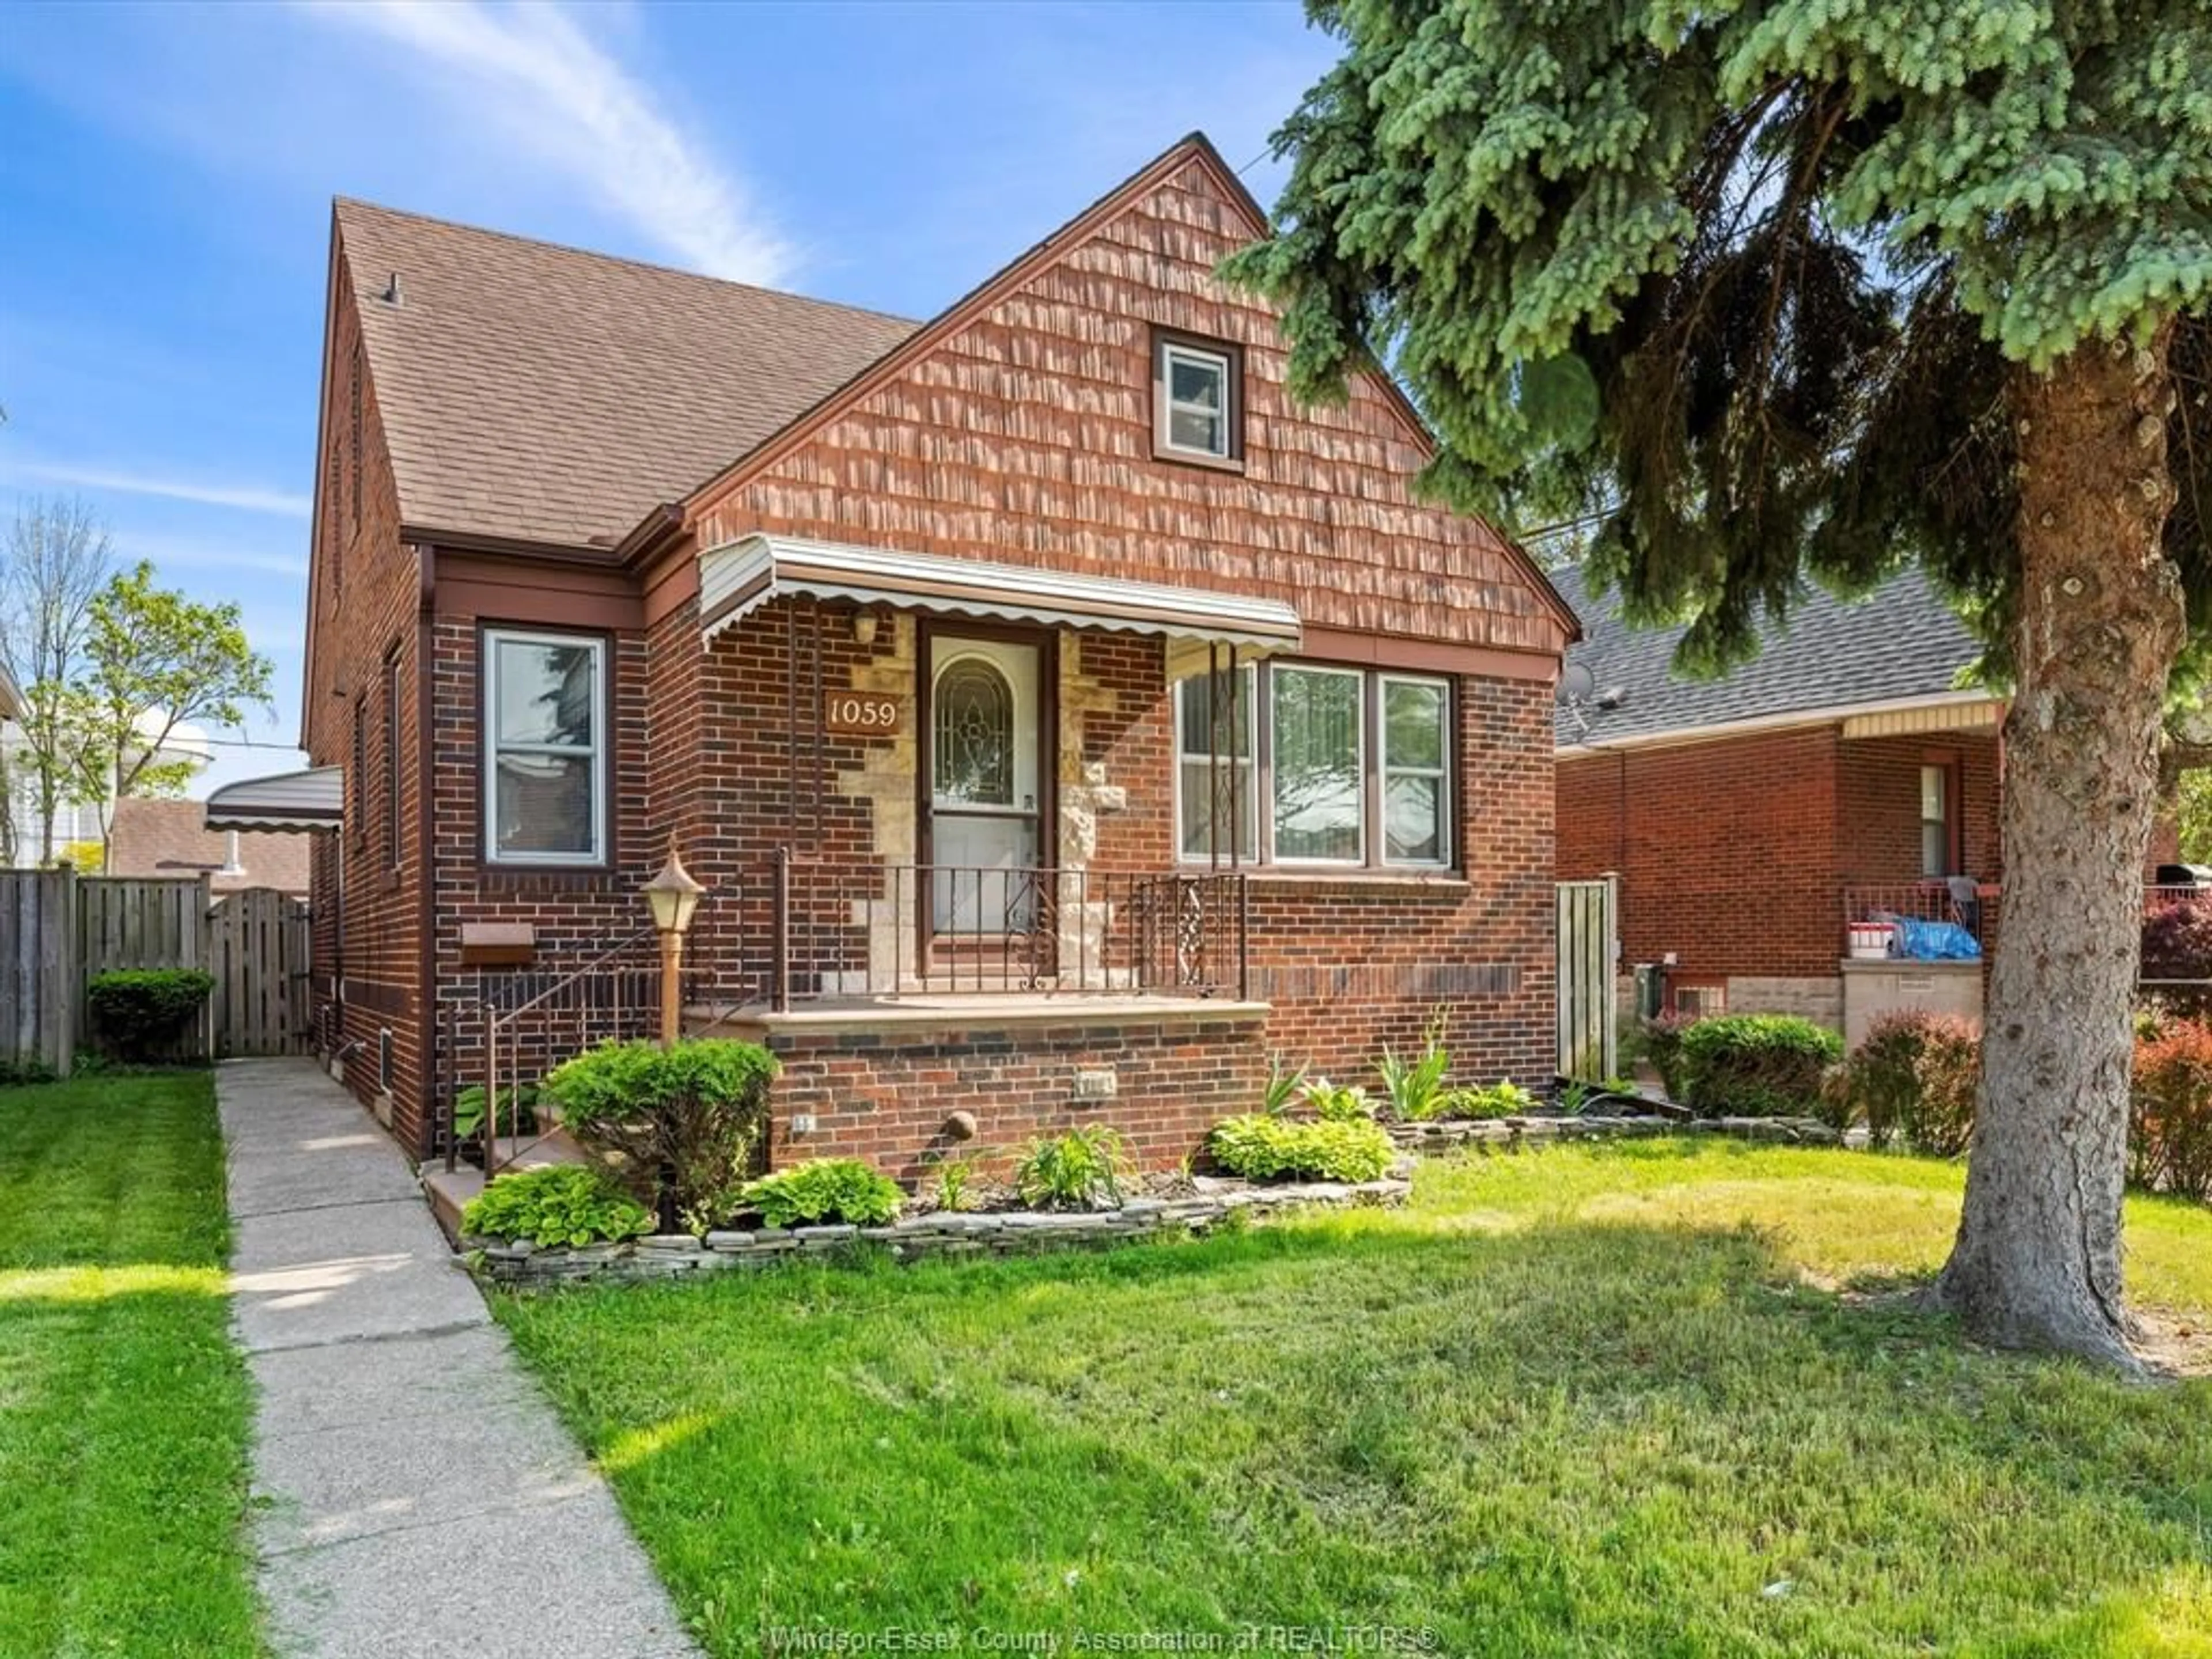 Home with brick exterior material for 1059 SHEPHERD St, Windsor Ontario N8X 2L6